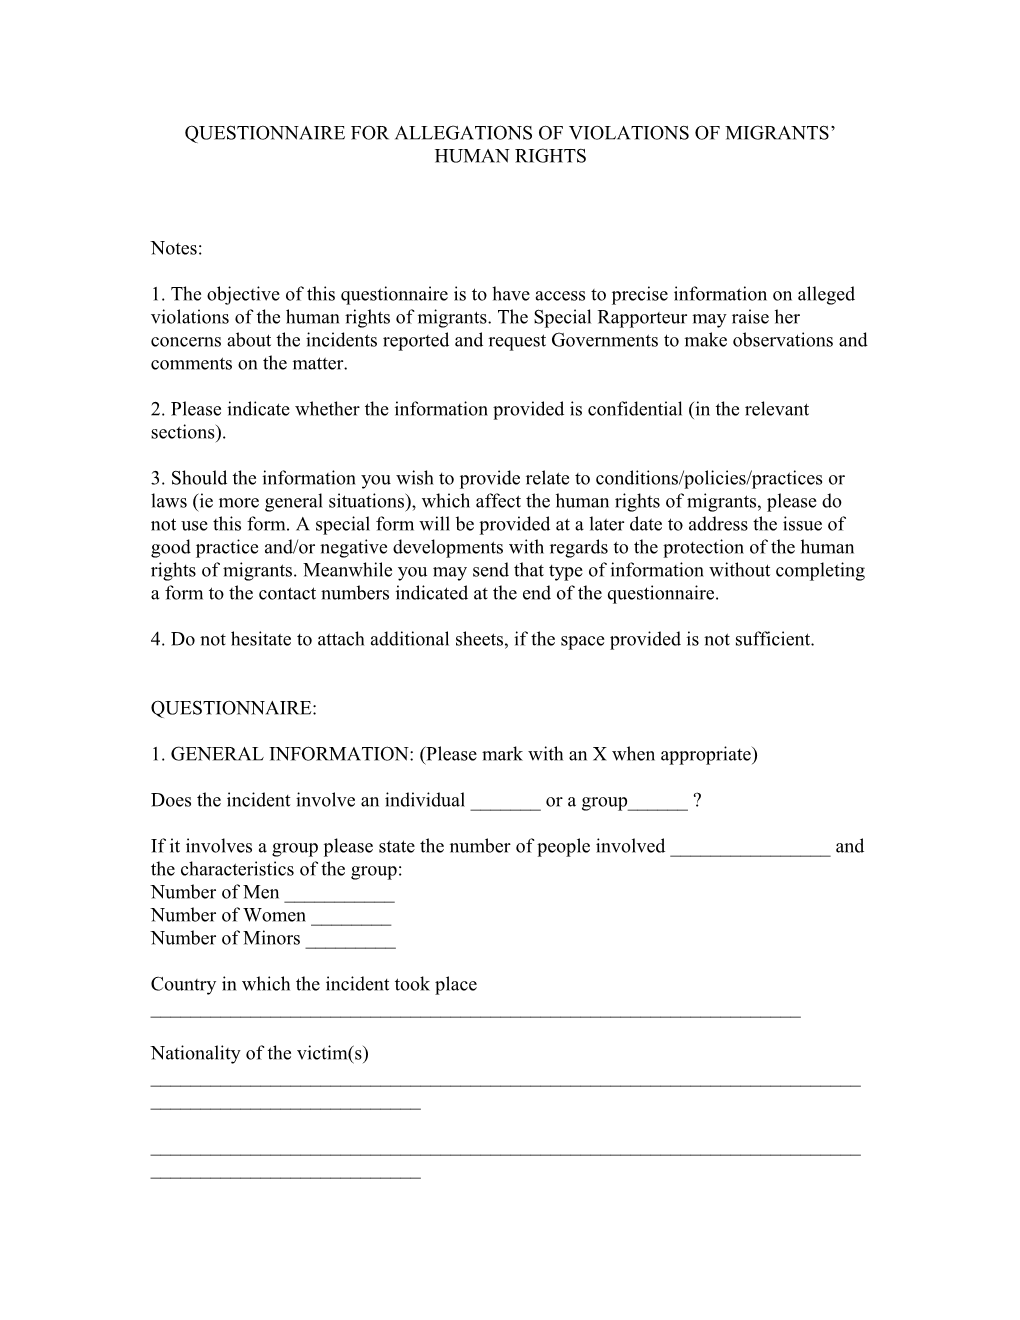 Questionnaire for Allegations of Violations of Migrants Human Rights